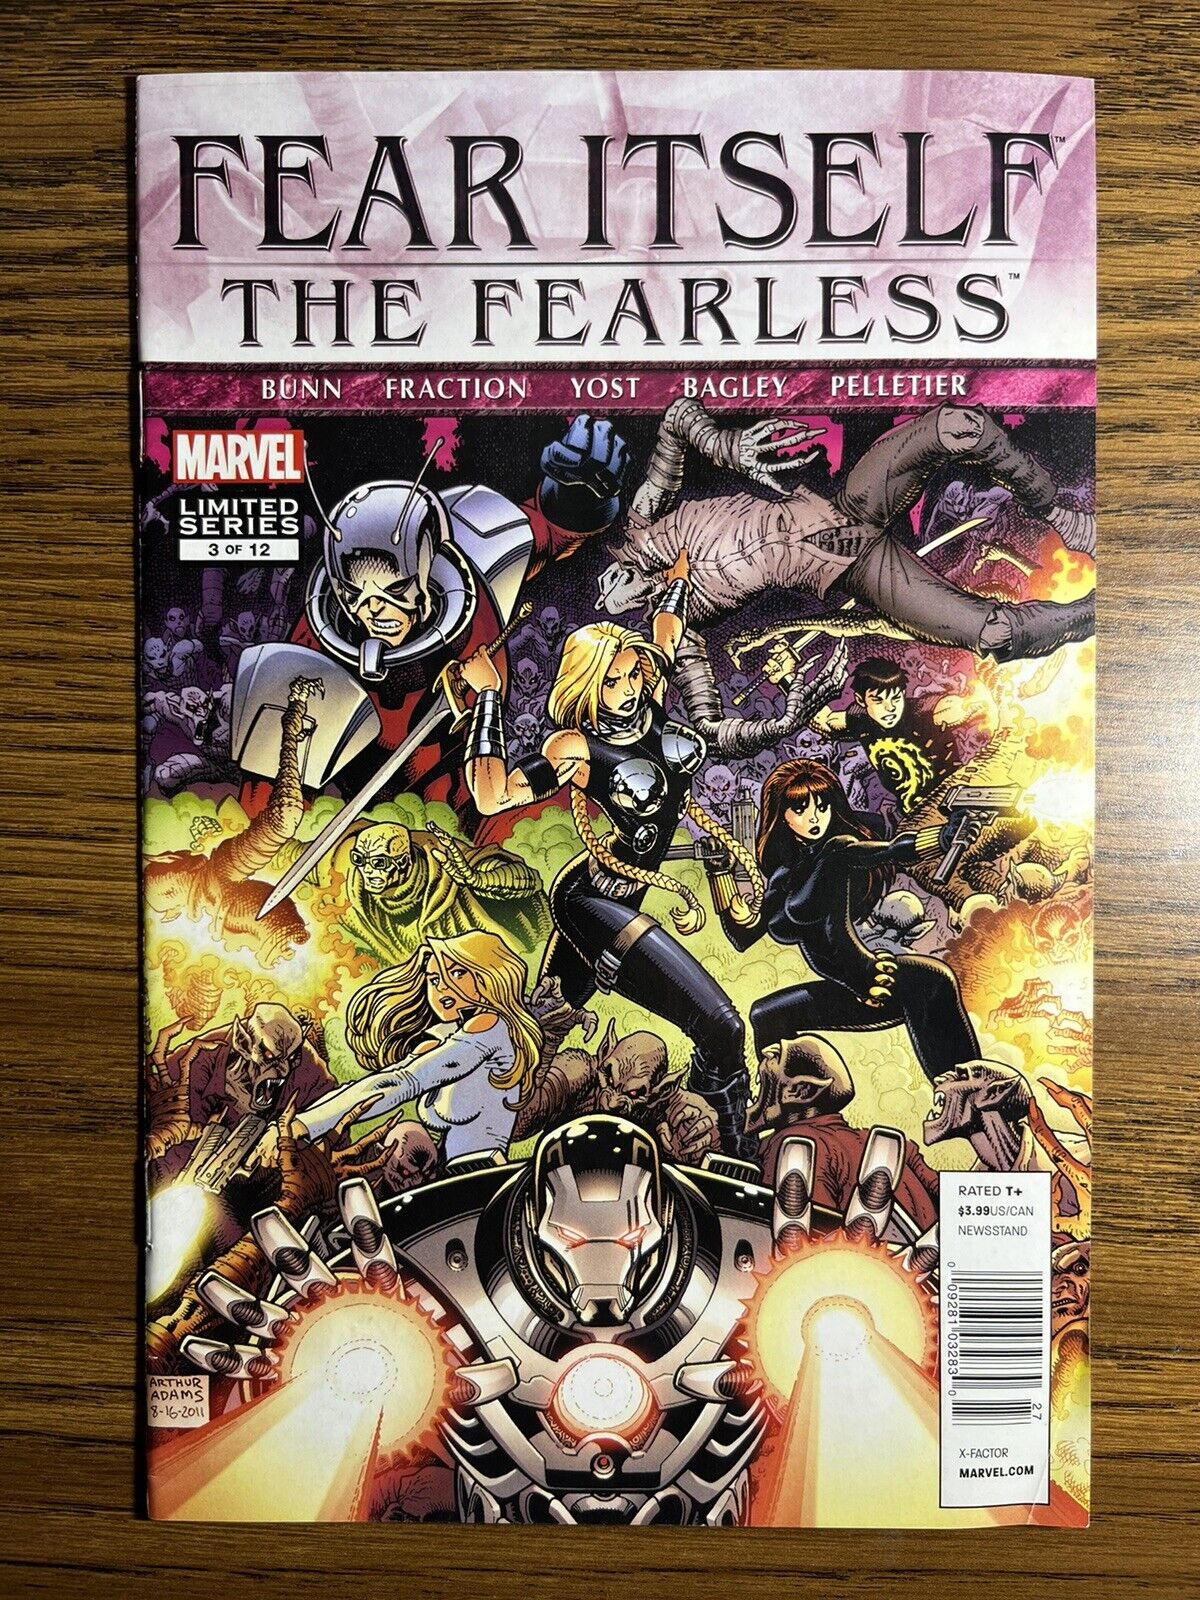 FEAR ITSELF: THE FEARLESS 3 EXTREMELY RARE NEWSSTAND $3.99 VARIANT MARVEL 2012